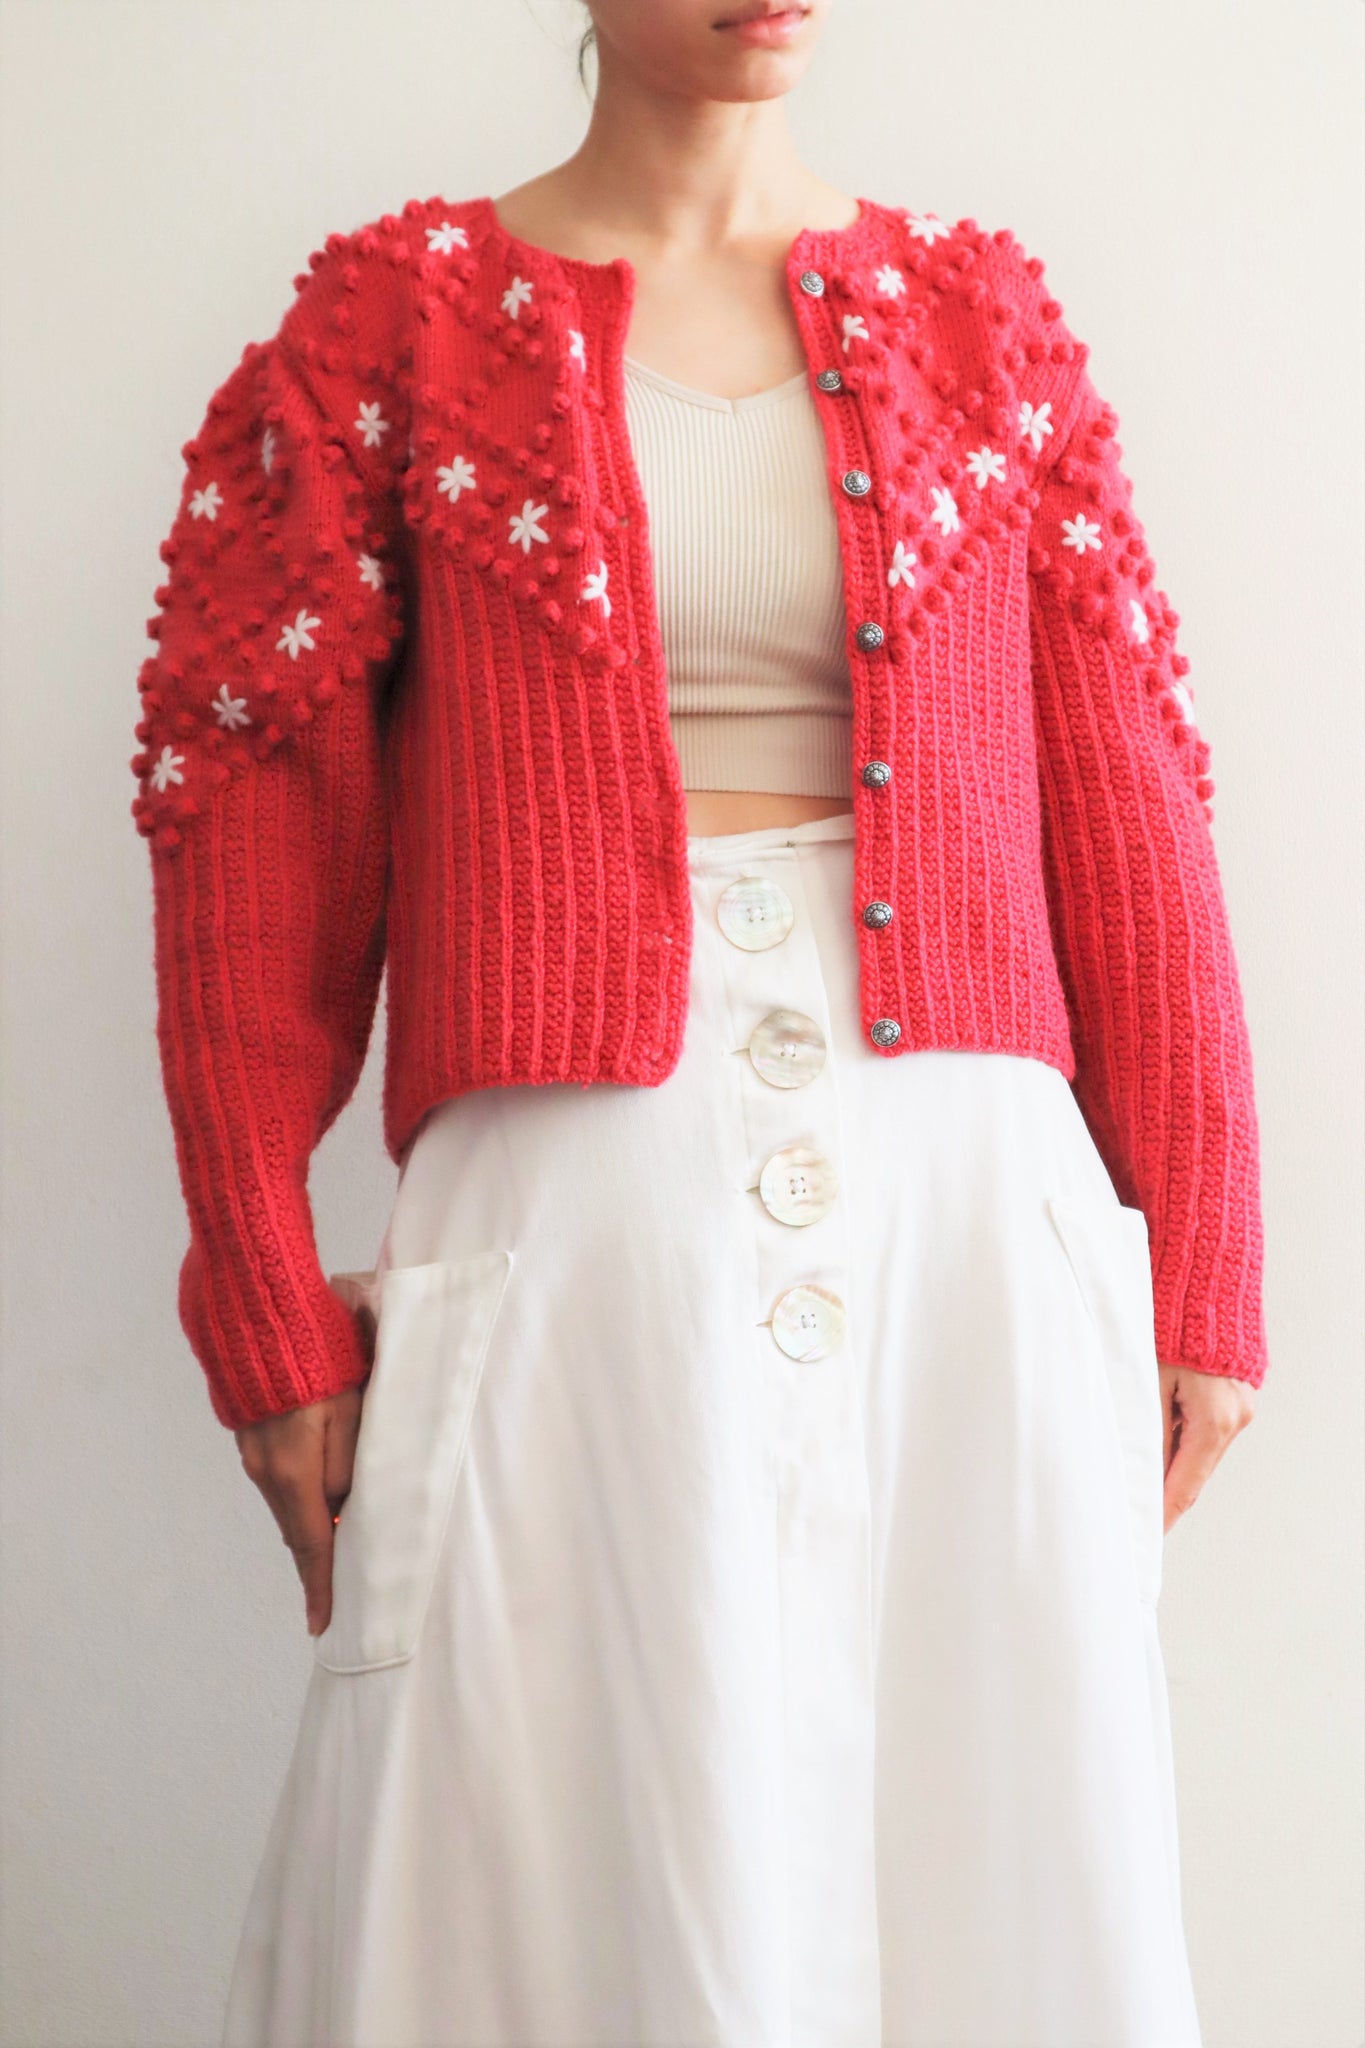 80s Embroidered White Flowers Hand Knit Pink Austrian Cardigan